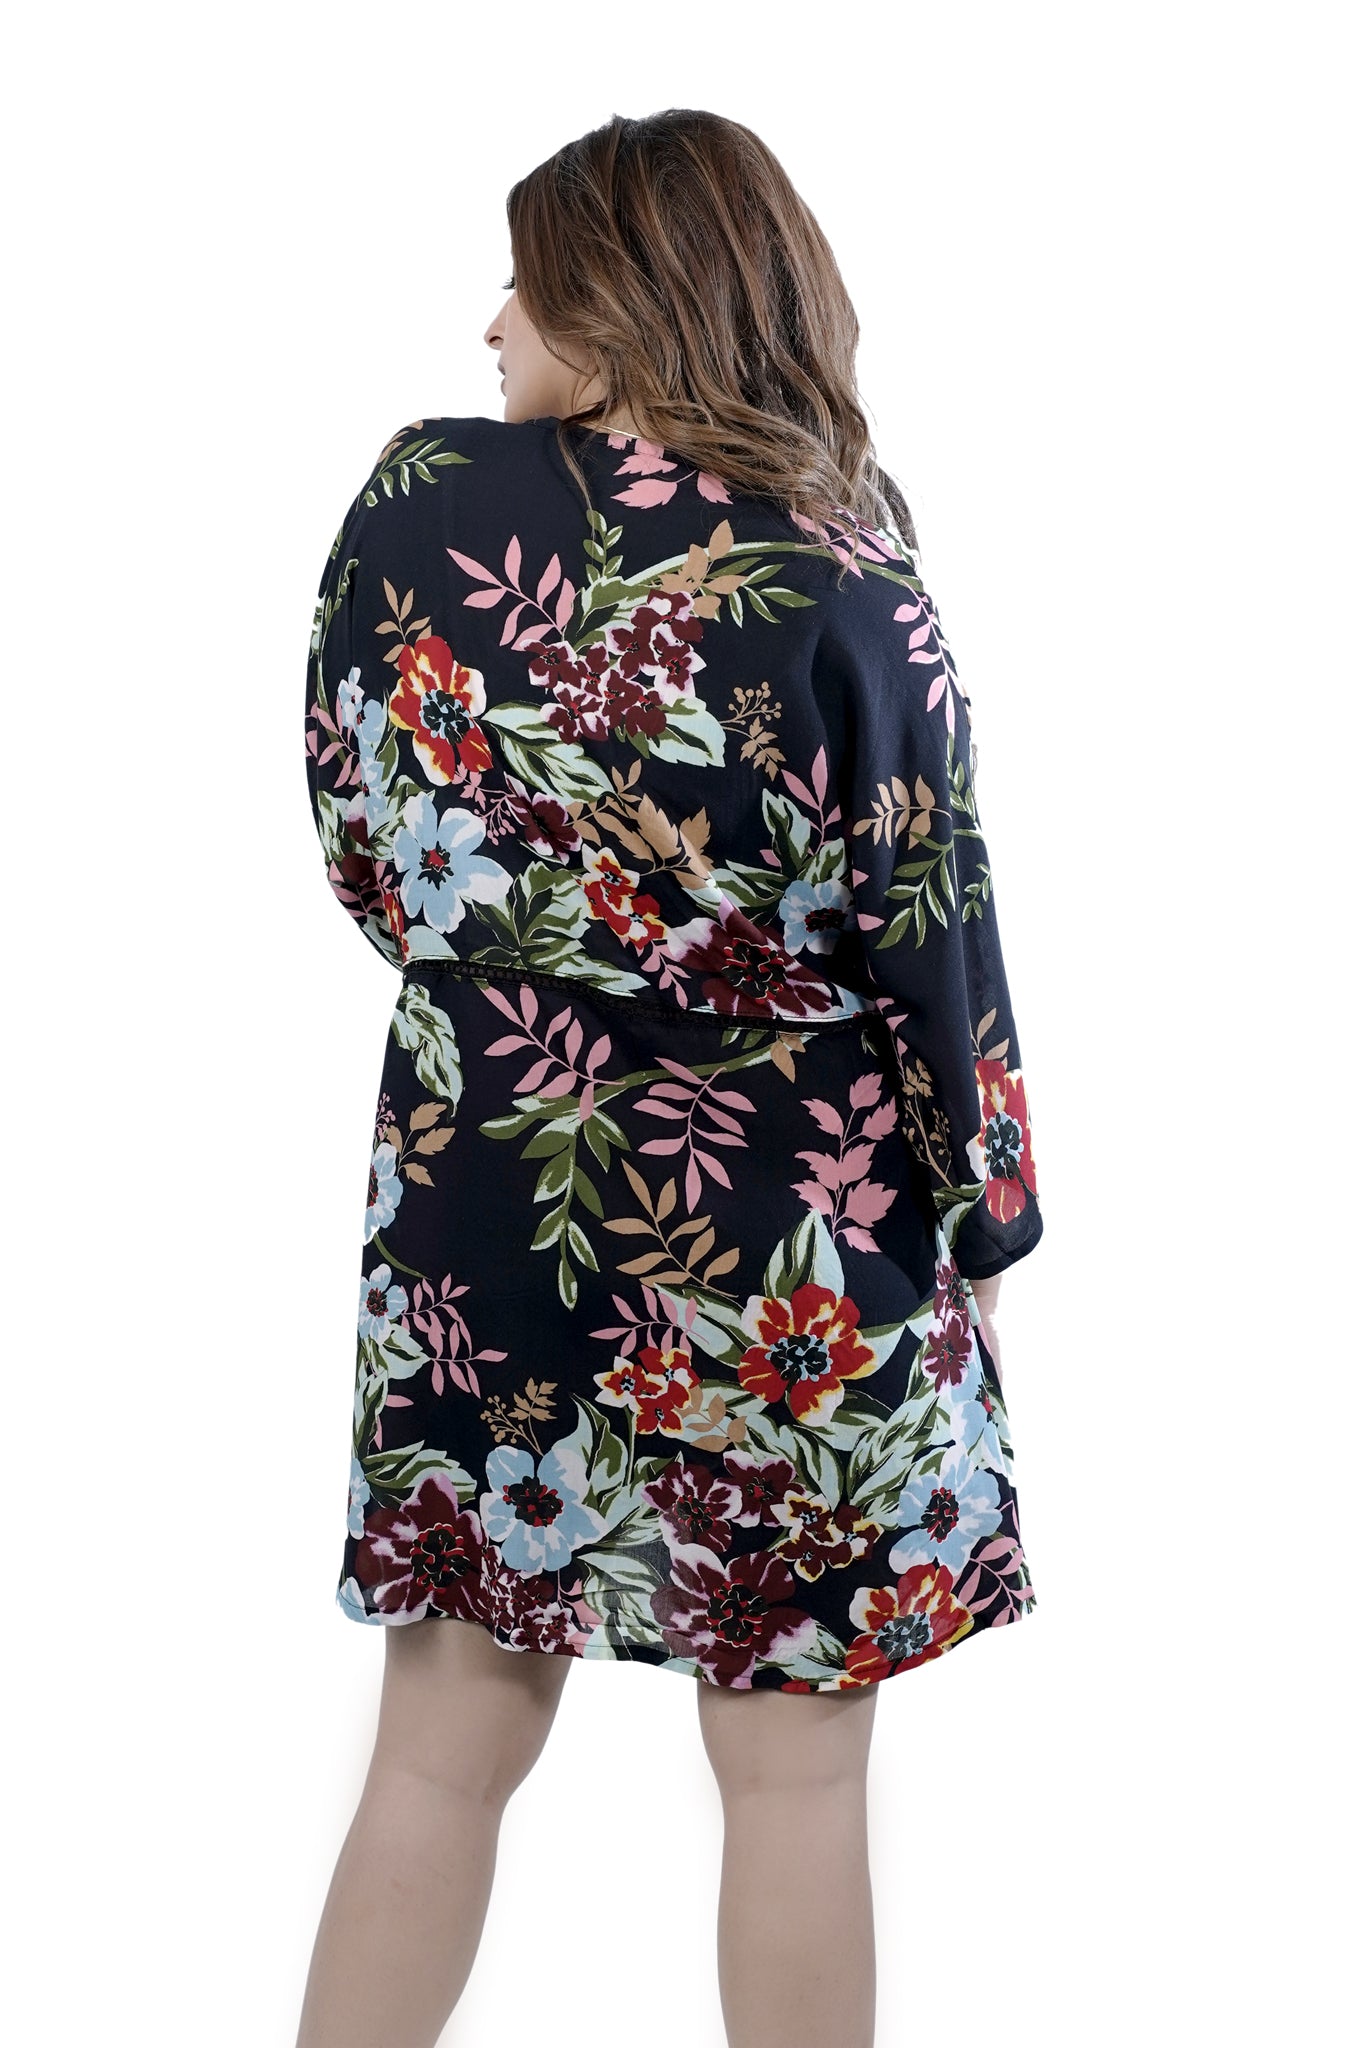 Fun Floral Cover Up